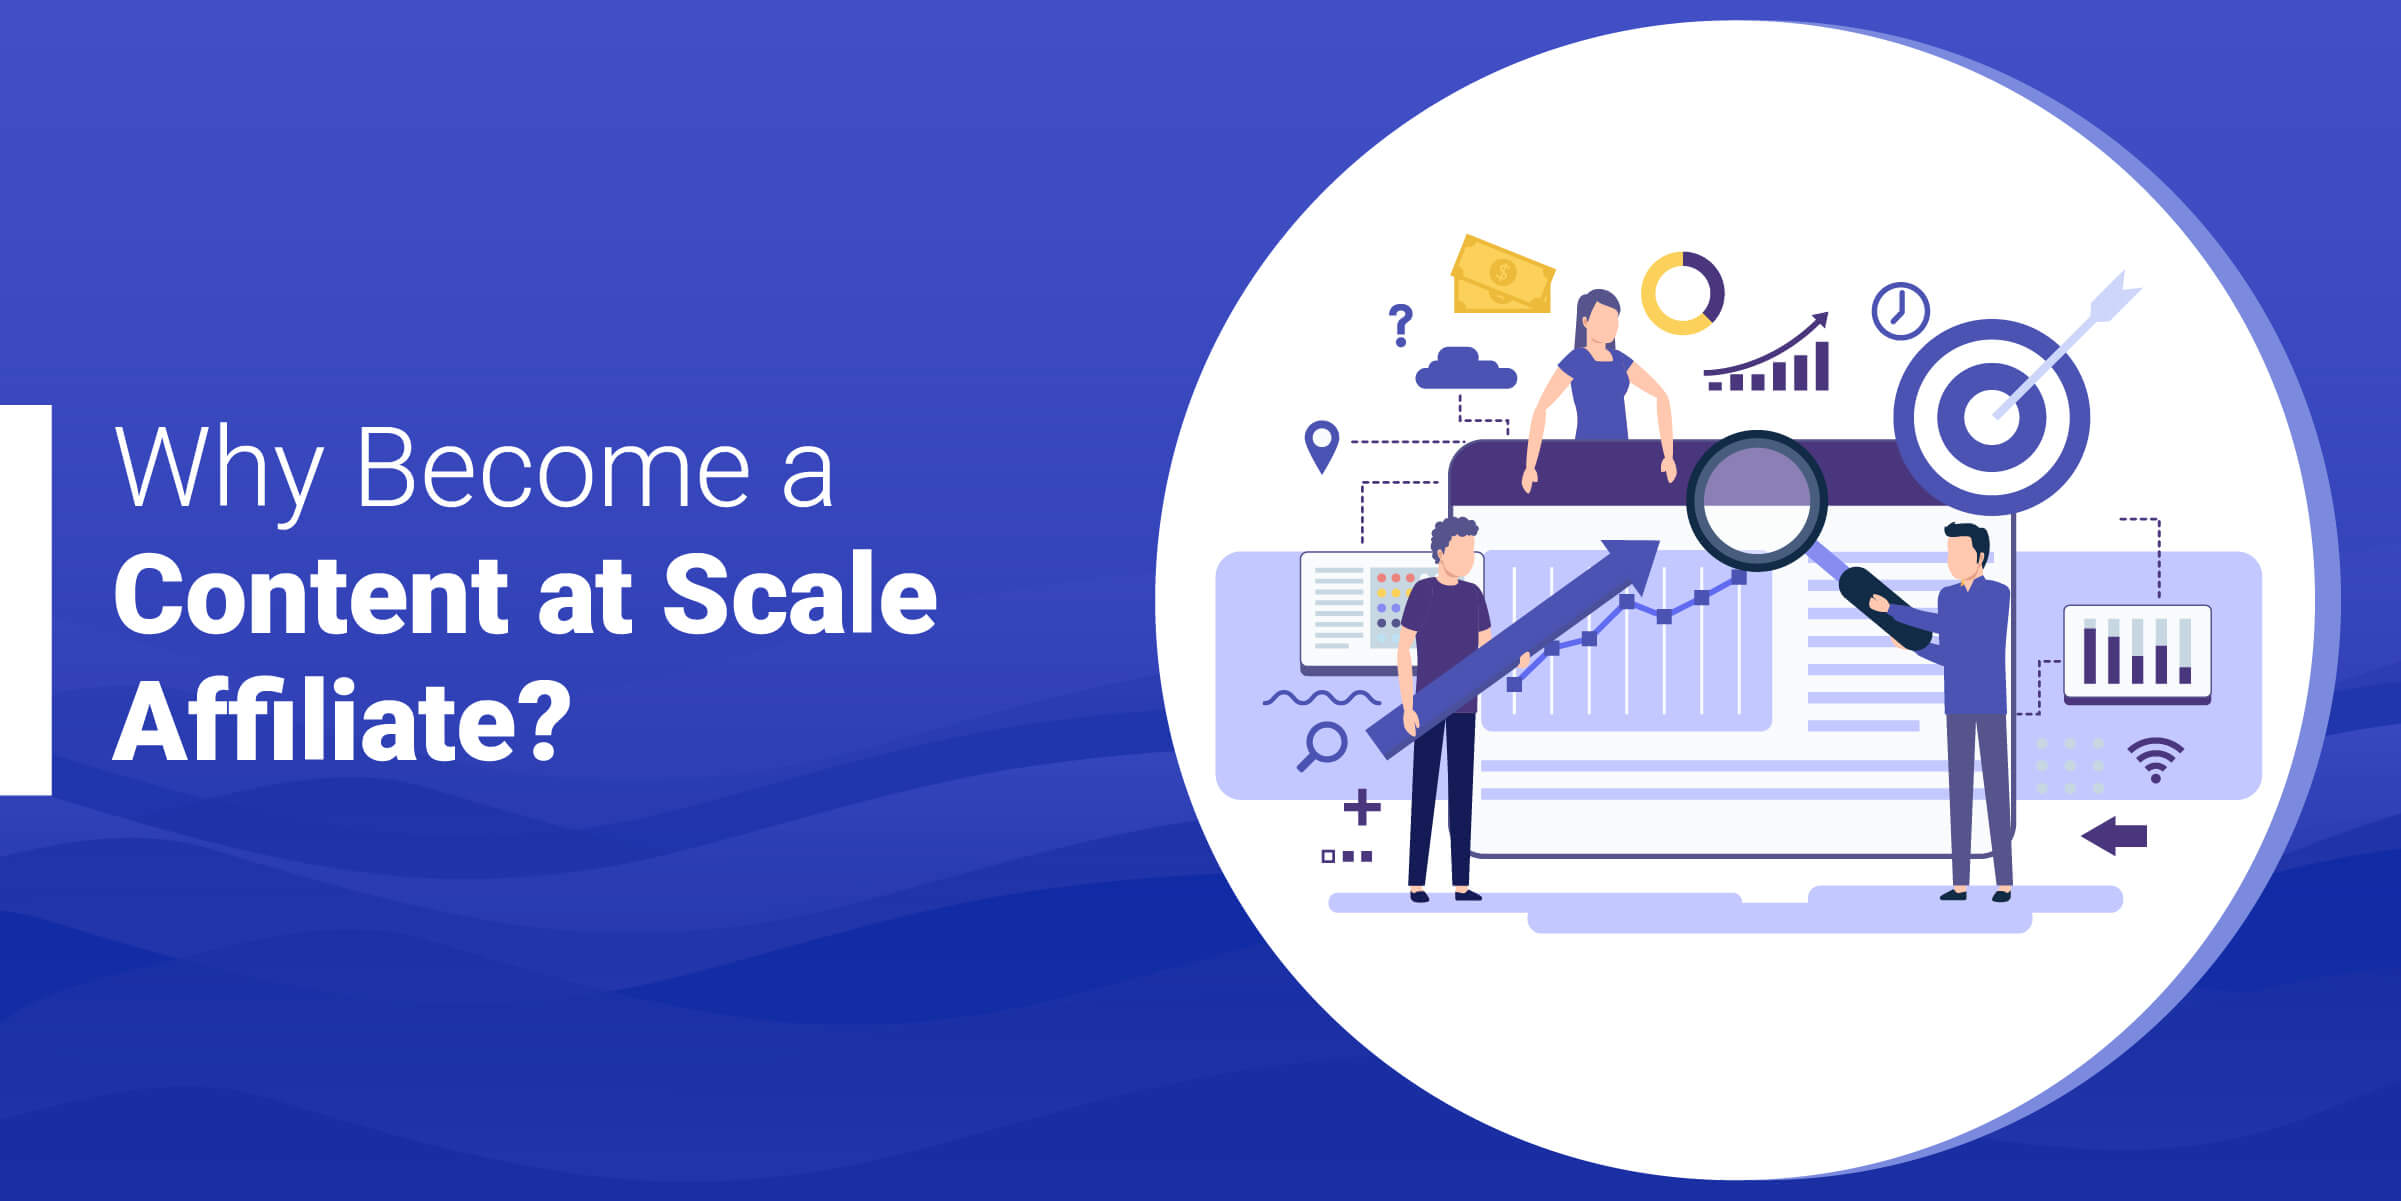 Why Become a Content at Scale Affiliate